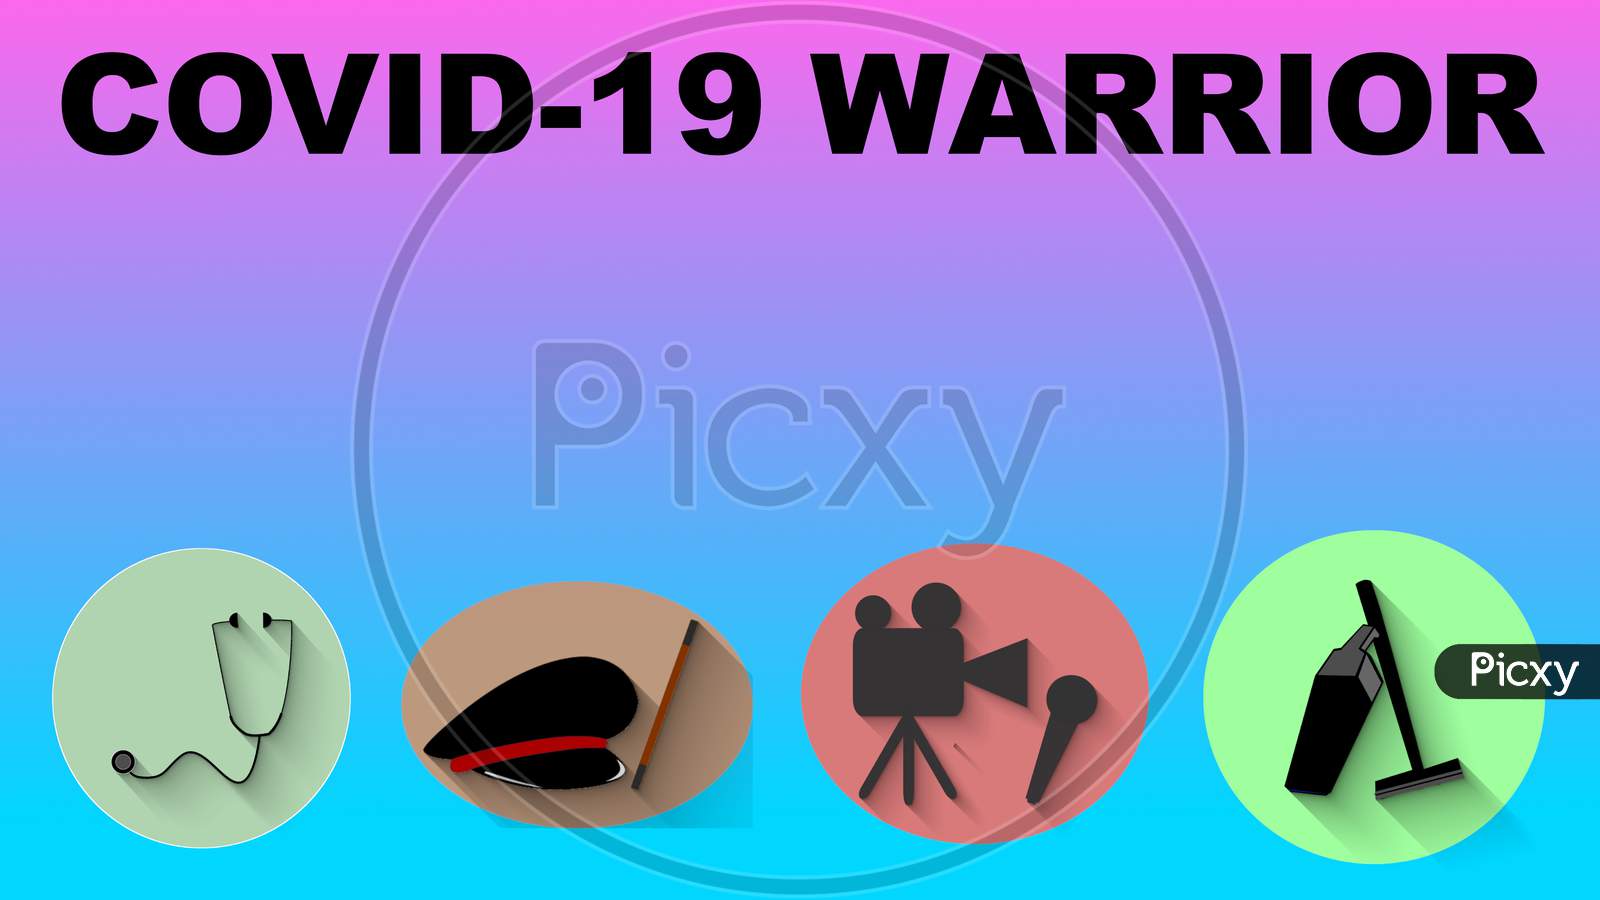 Covid-19 Banner Or Template. Illustration Graphic Of The Word 'Covid-19 Warrior' With The Four Symbol Icon Of Doctor, Police, Media And Cleaners.